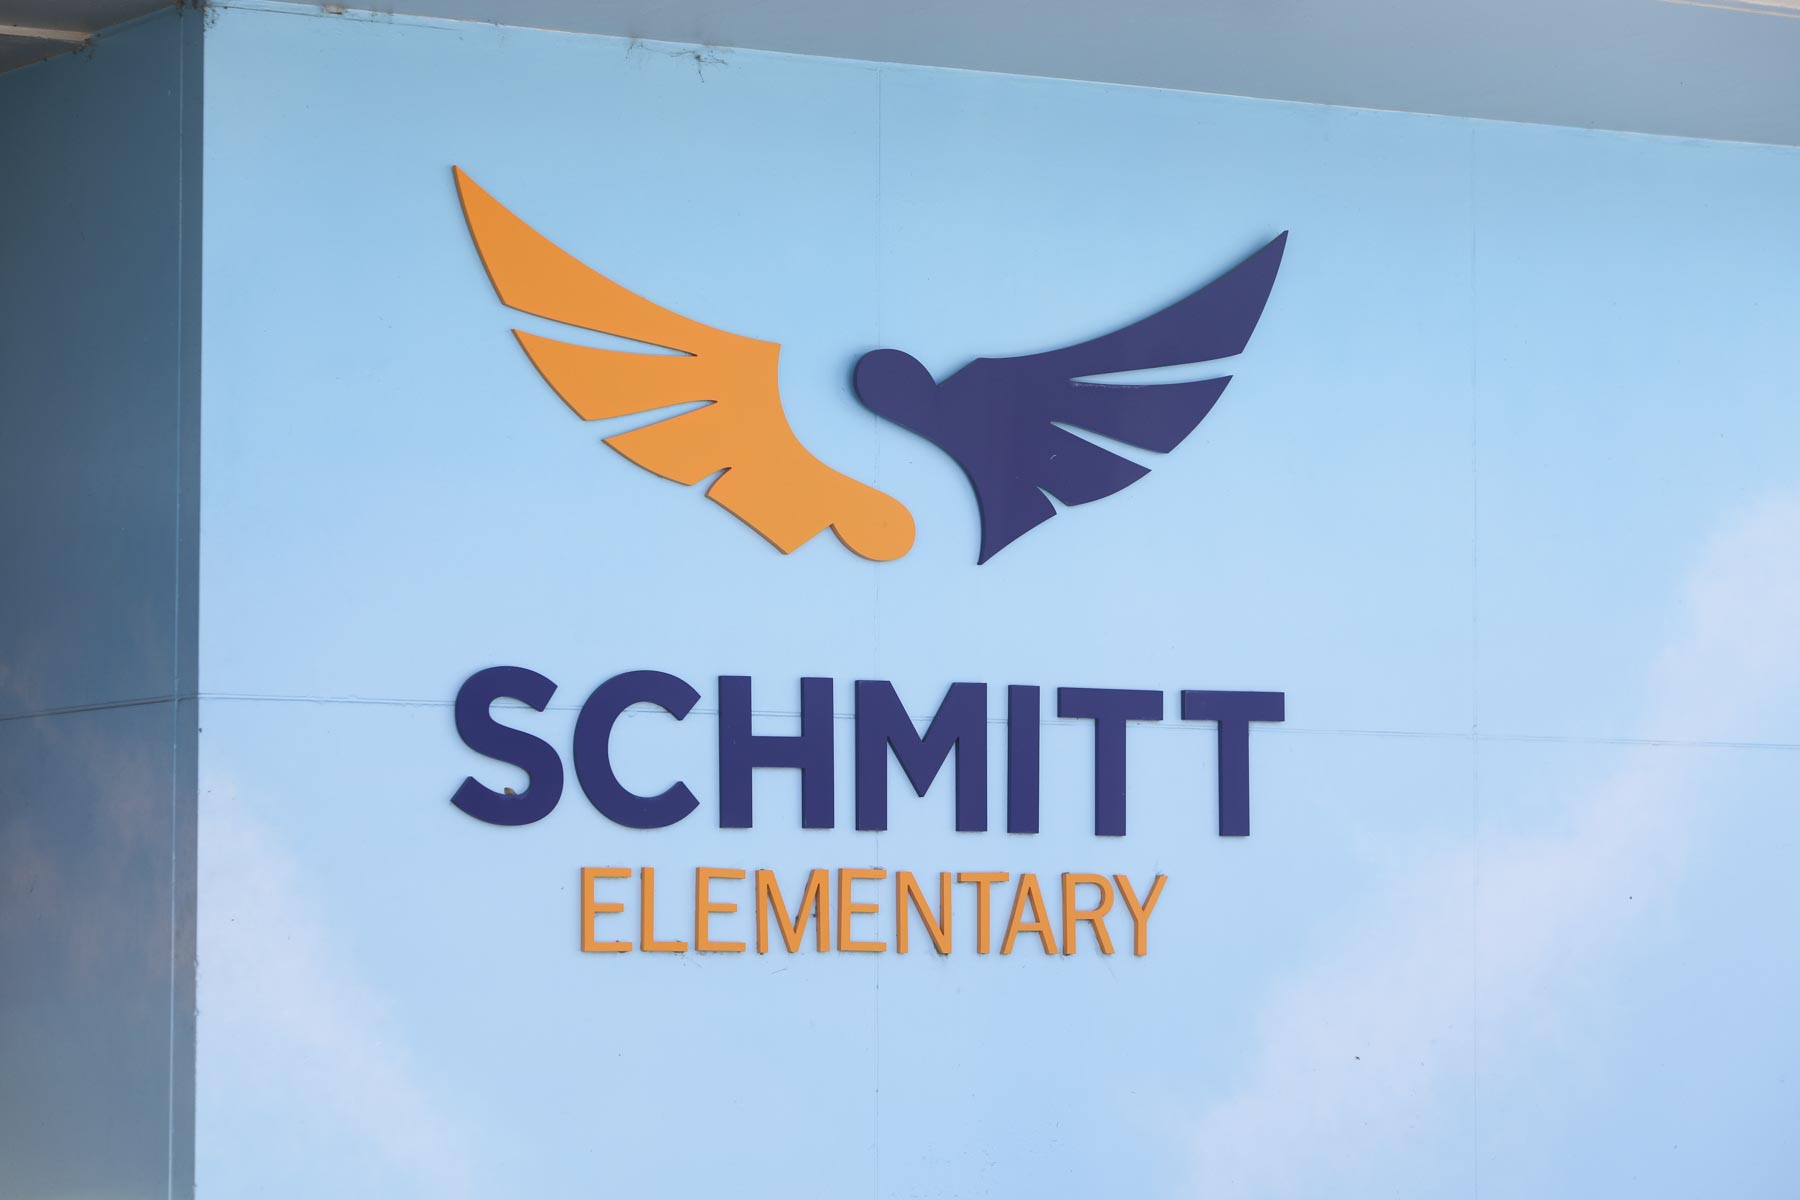 The Schmitt Elementary sign at the front of the school building